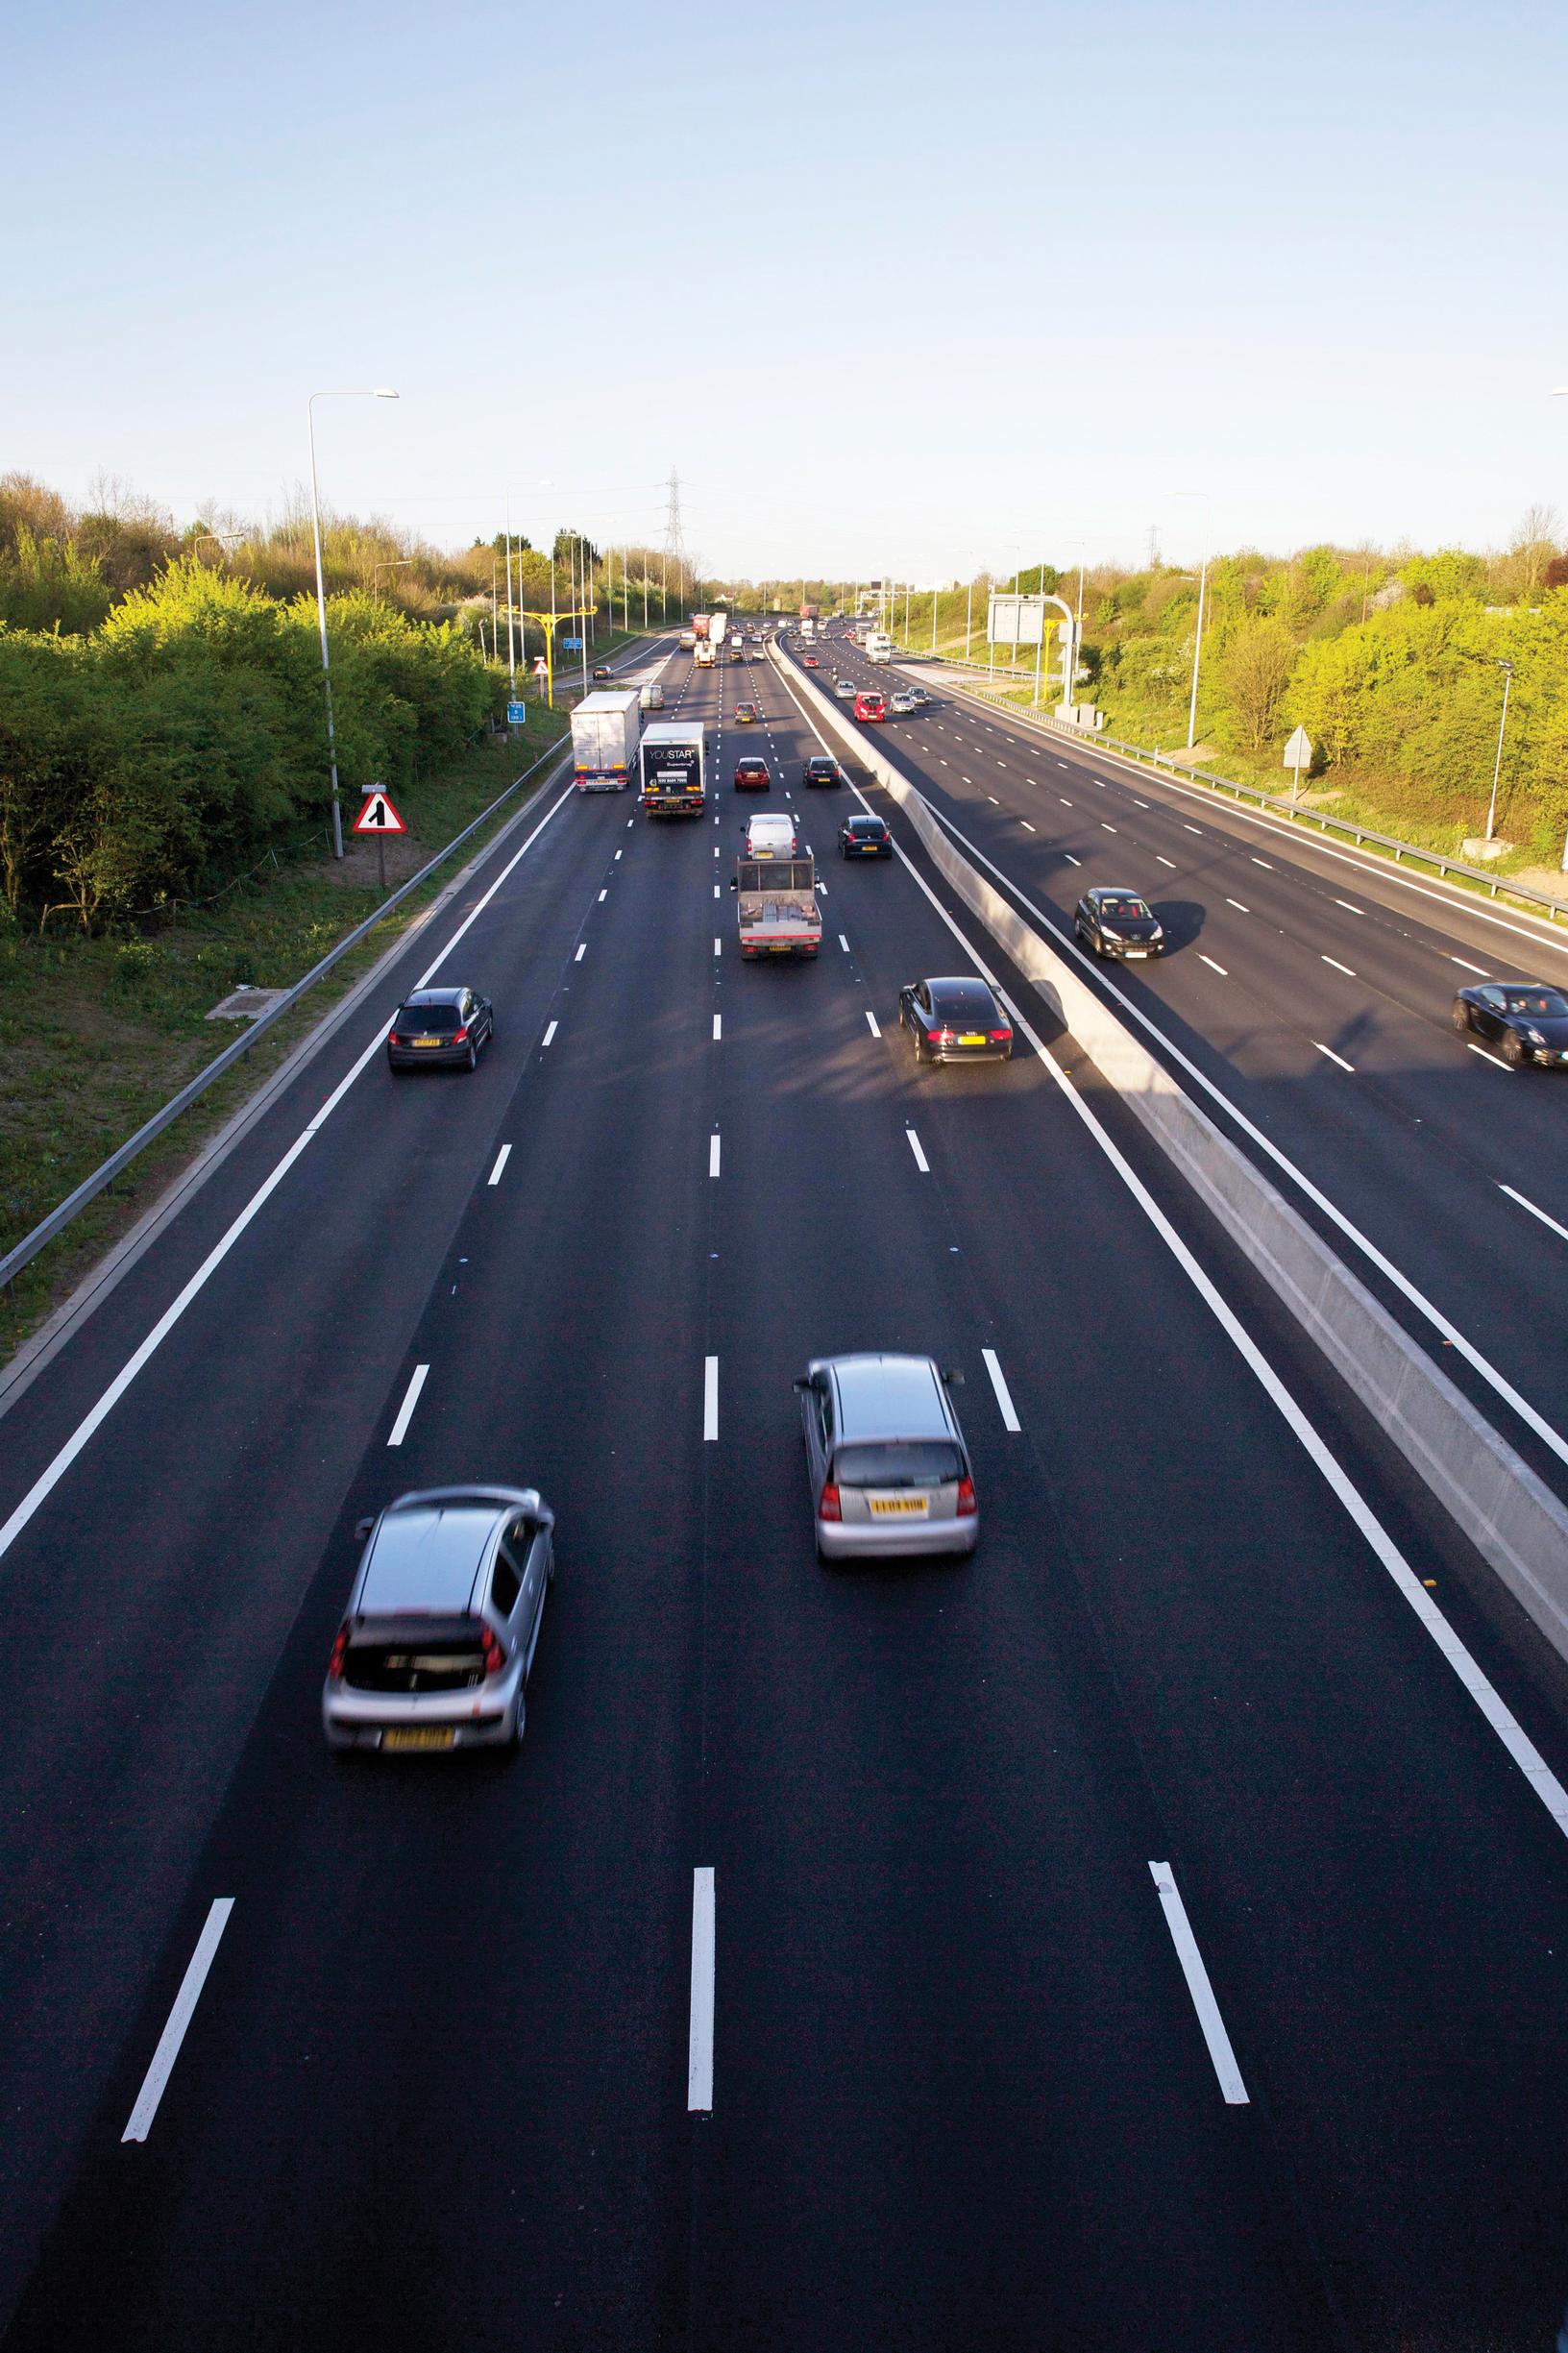 All-lane running on the M25